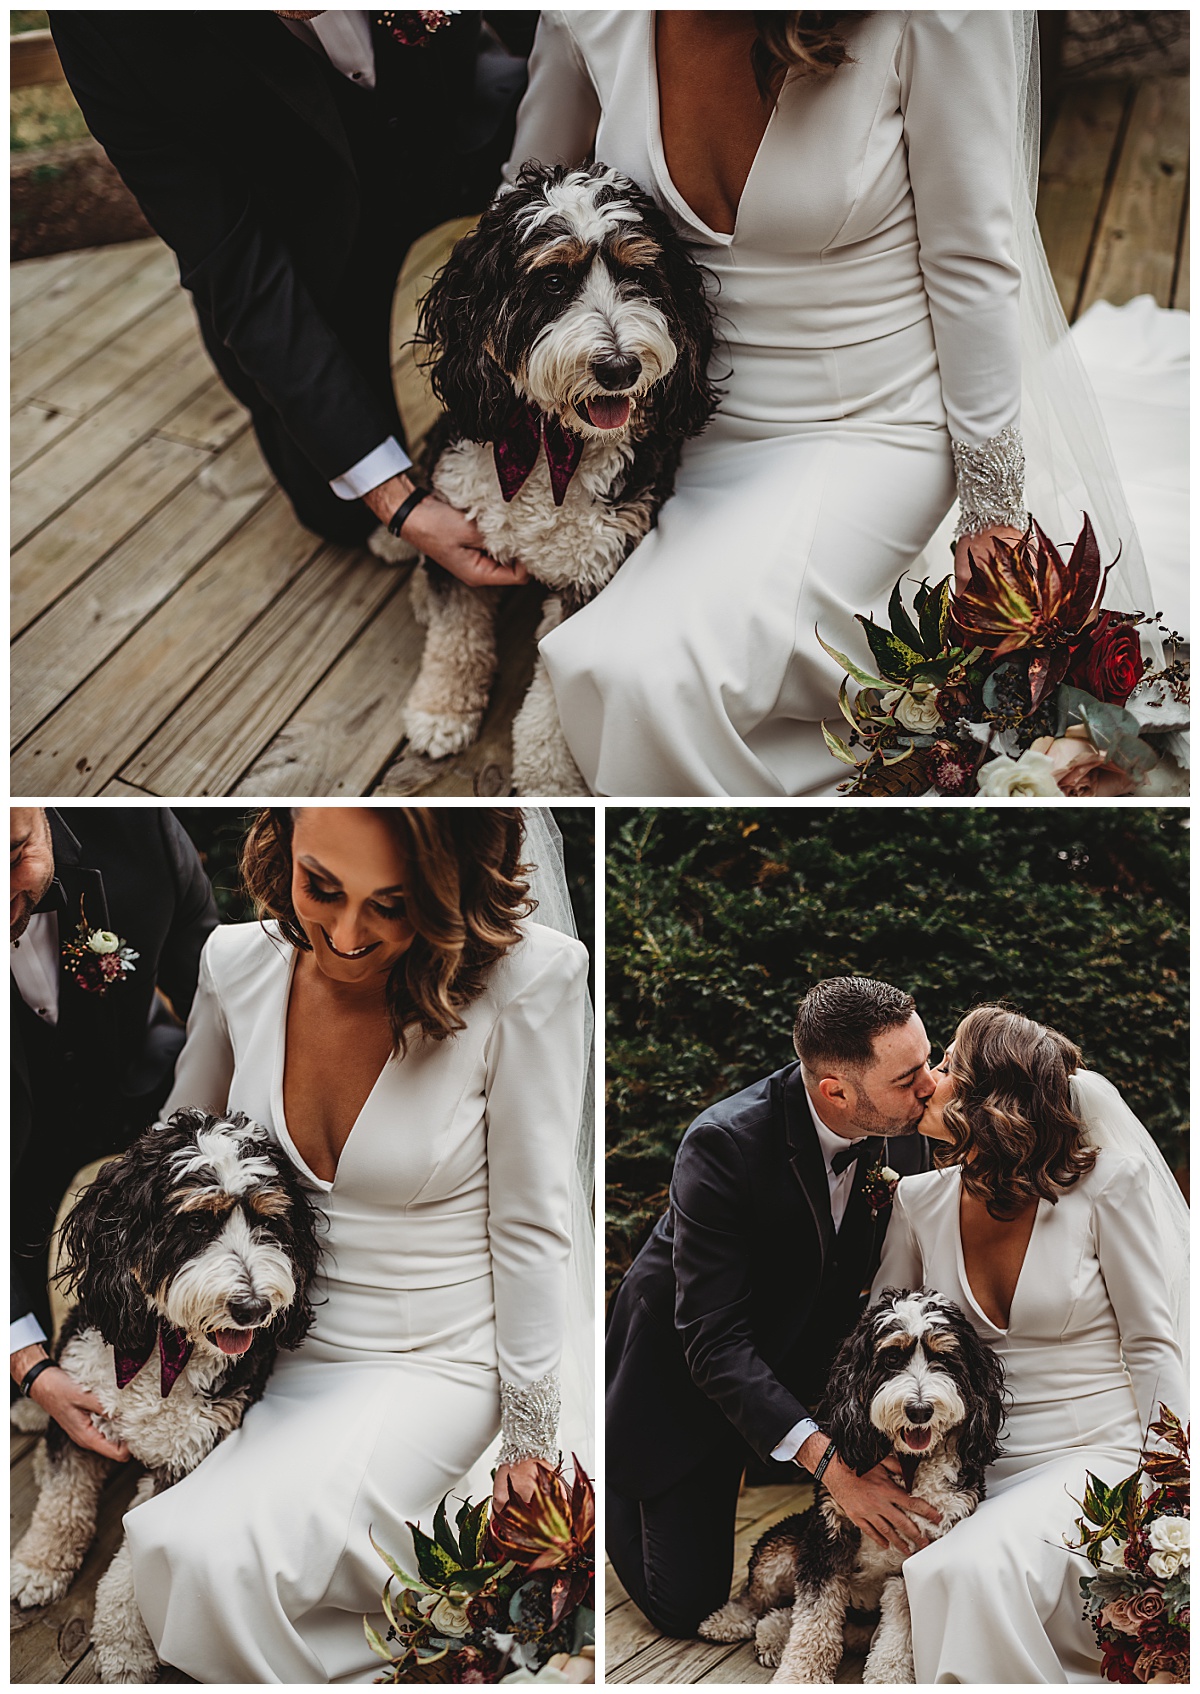 Bride and groom pictures with their dog for a moody winter wedding in Baltimore by Brittany Dunbar Photography, a Baltimore Wedding Photographer.